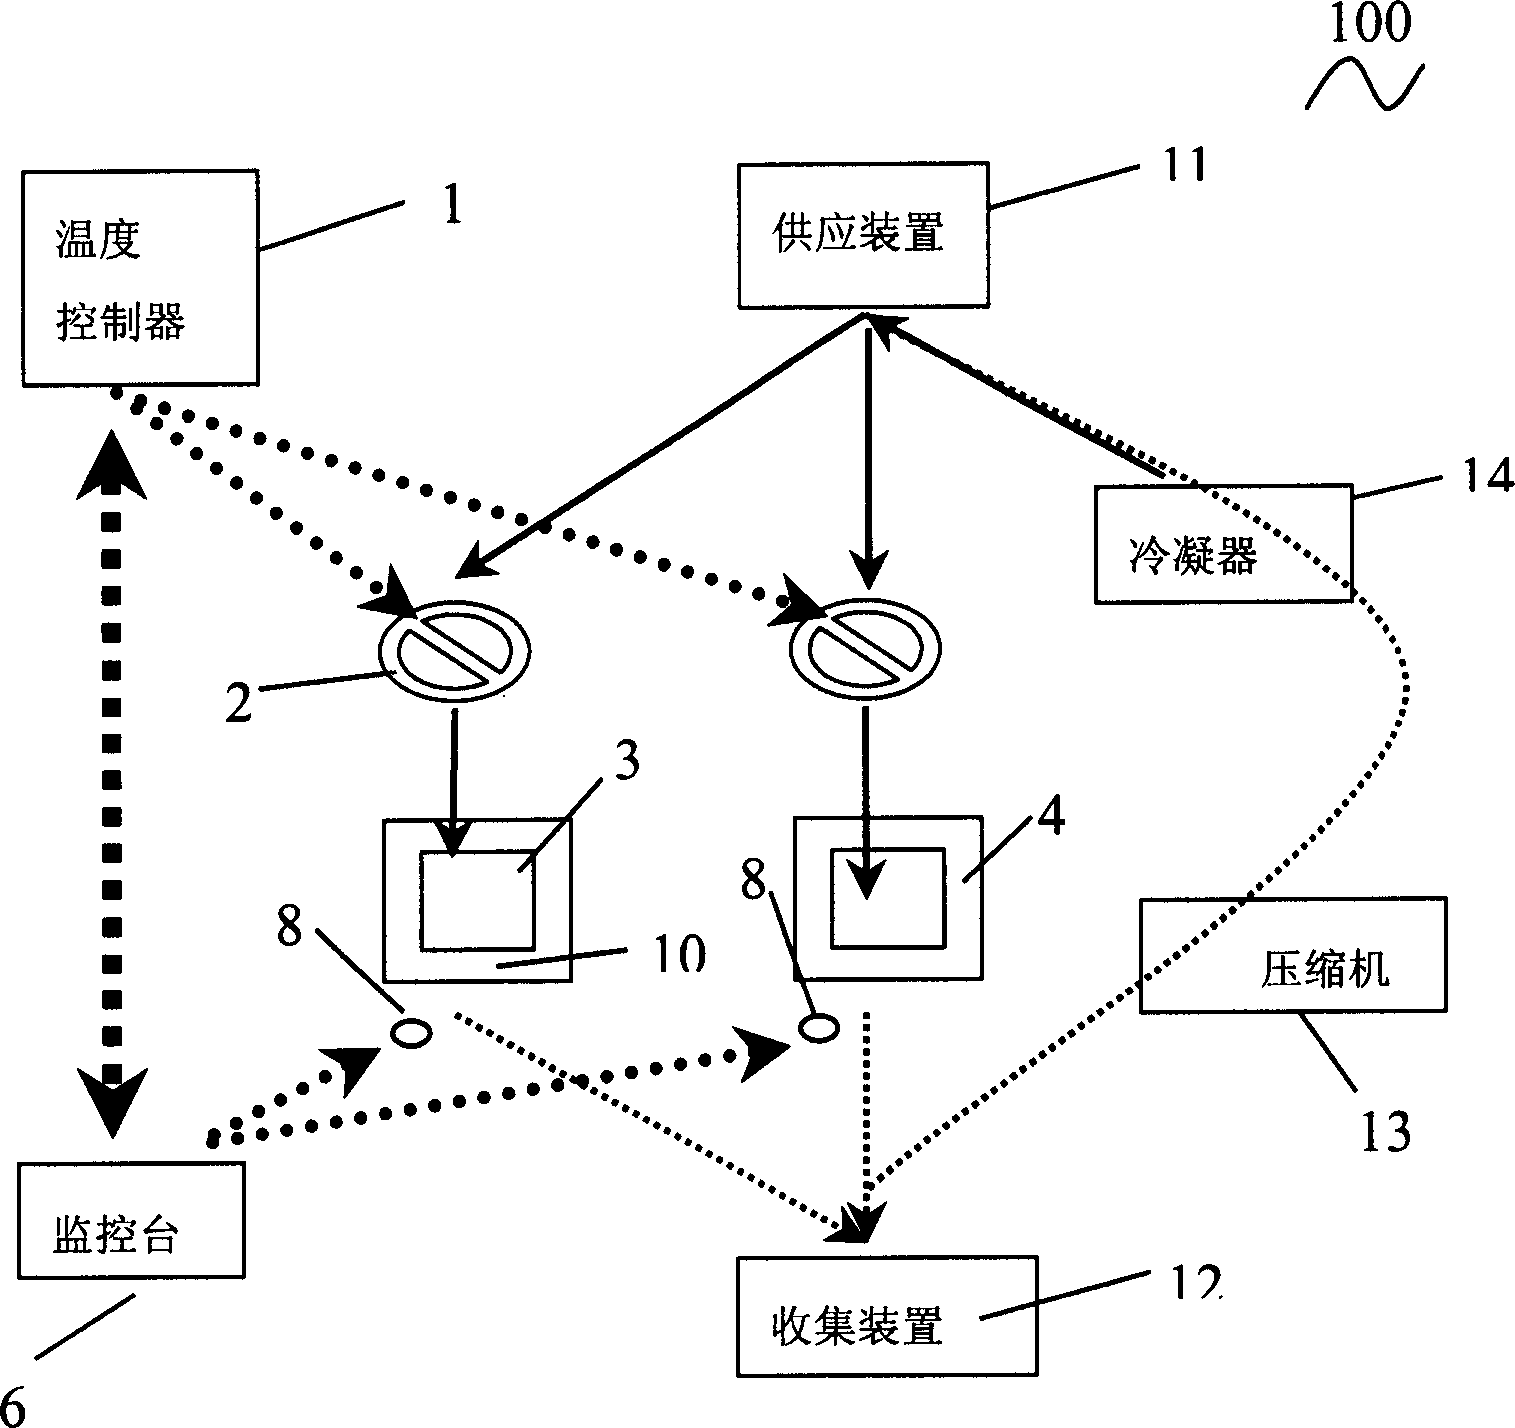 Electronic equipment temperature control system and method